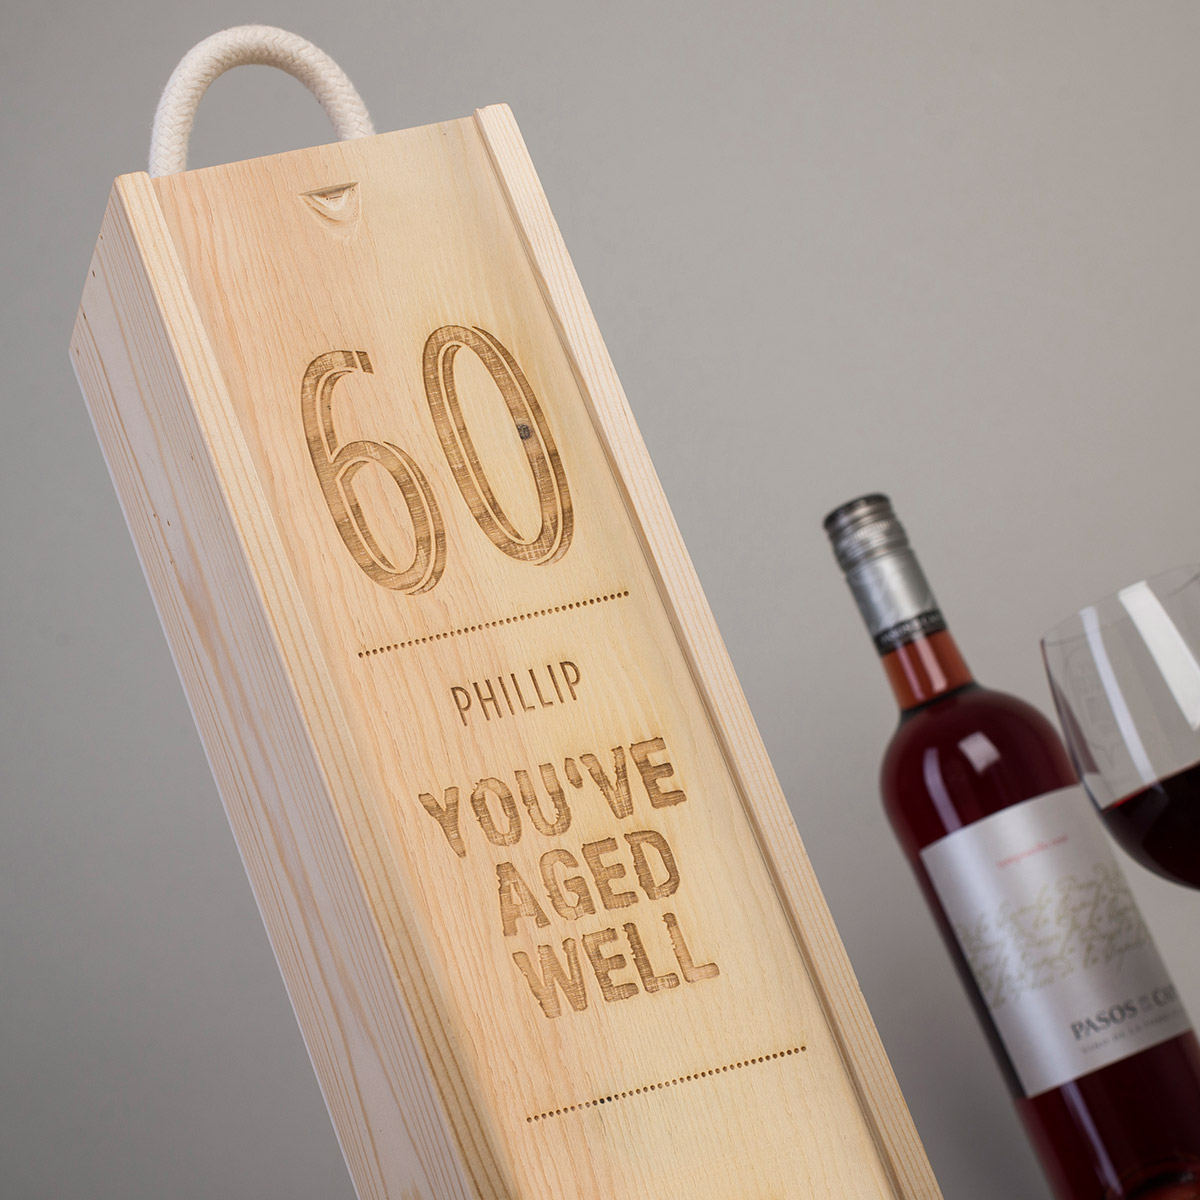 Personalised Wooden Wine Box - You've Aged Well